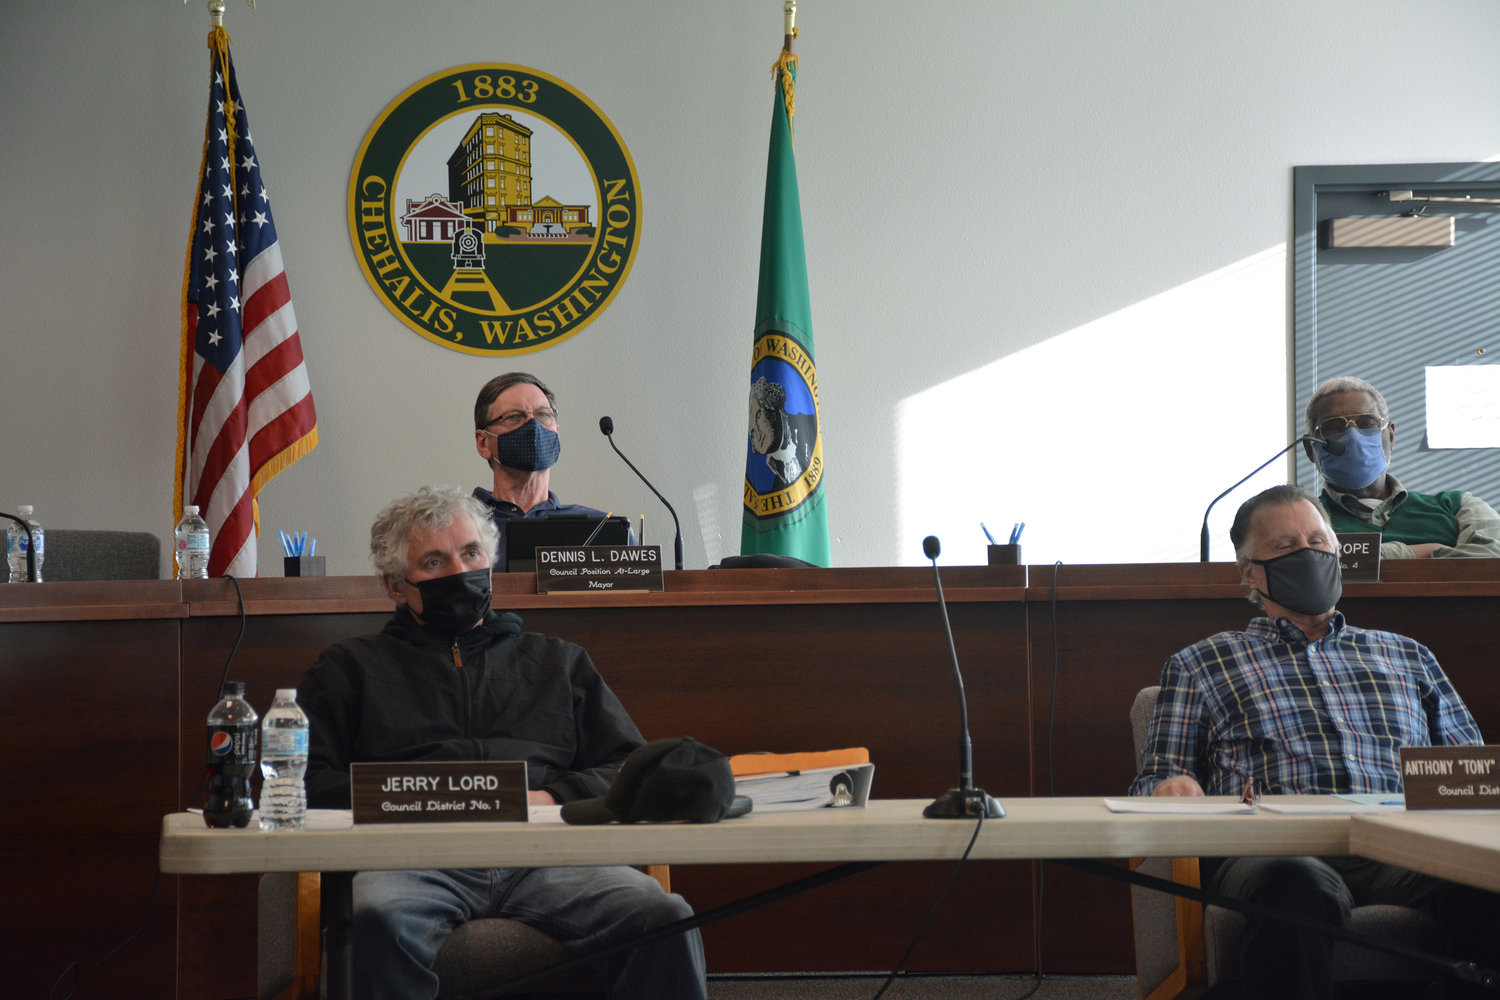 Chehalis city councilmembers listen to a member of the public’s critiques at a meeting earlier this year.